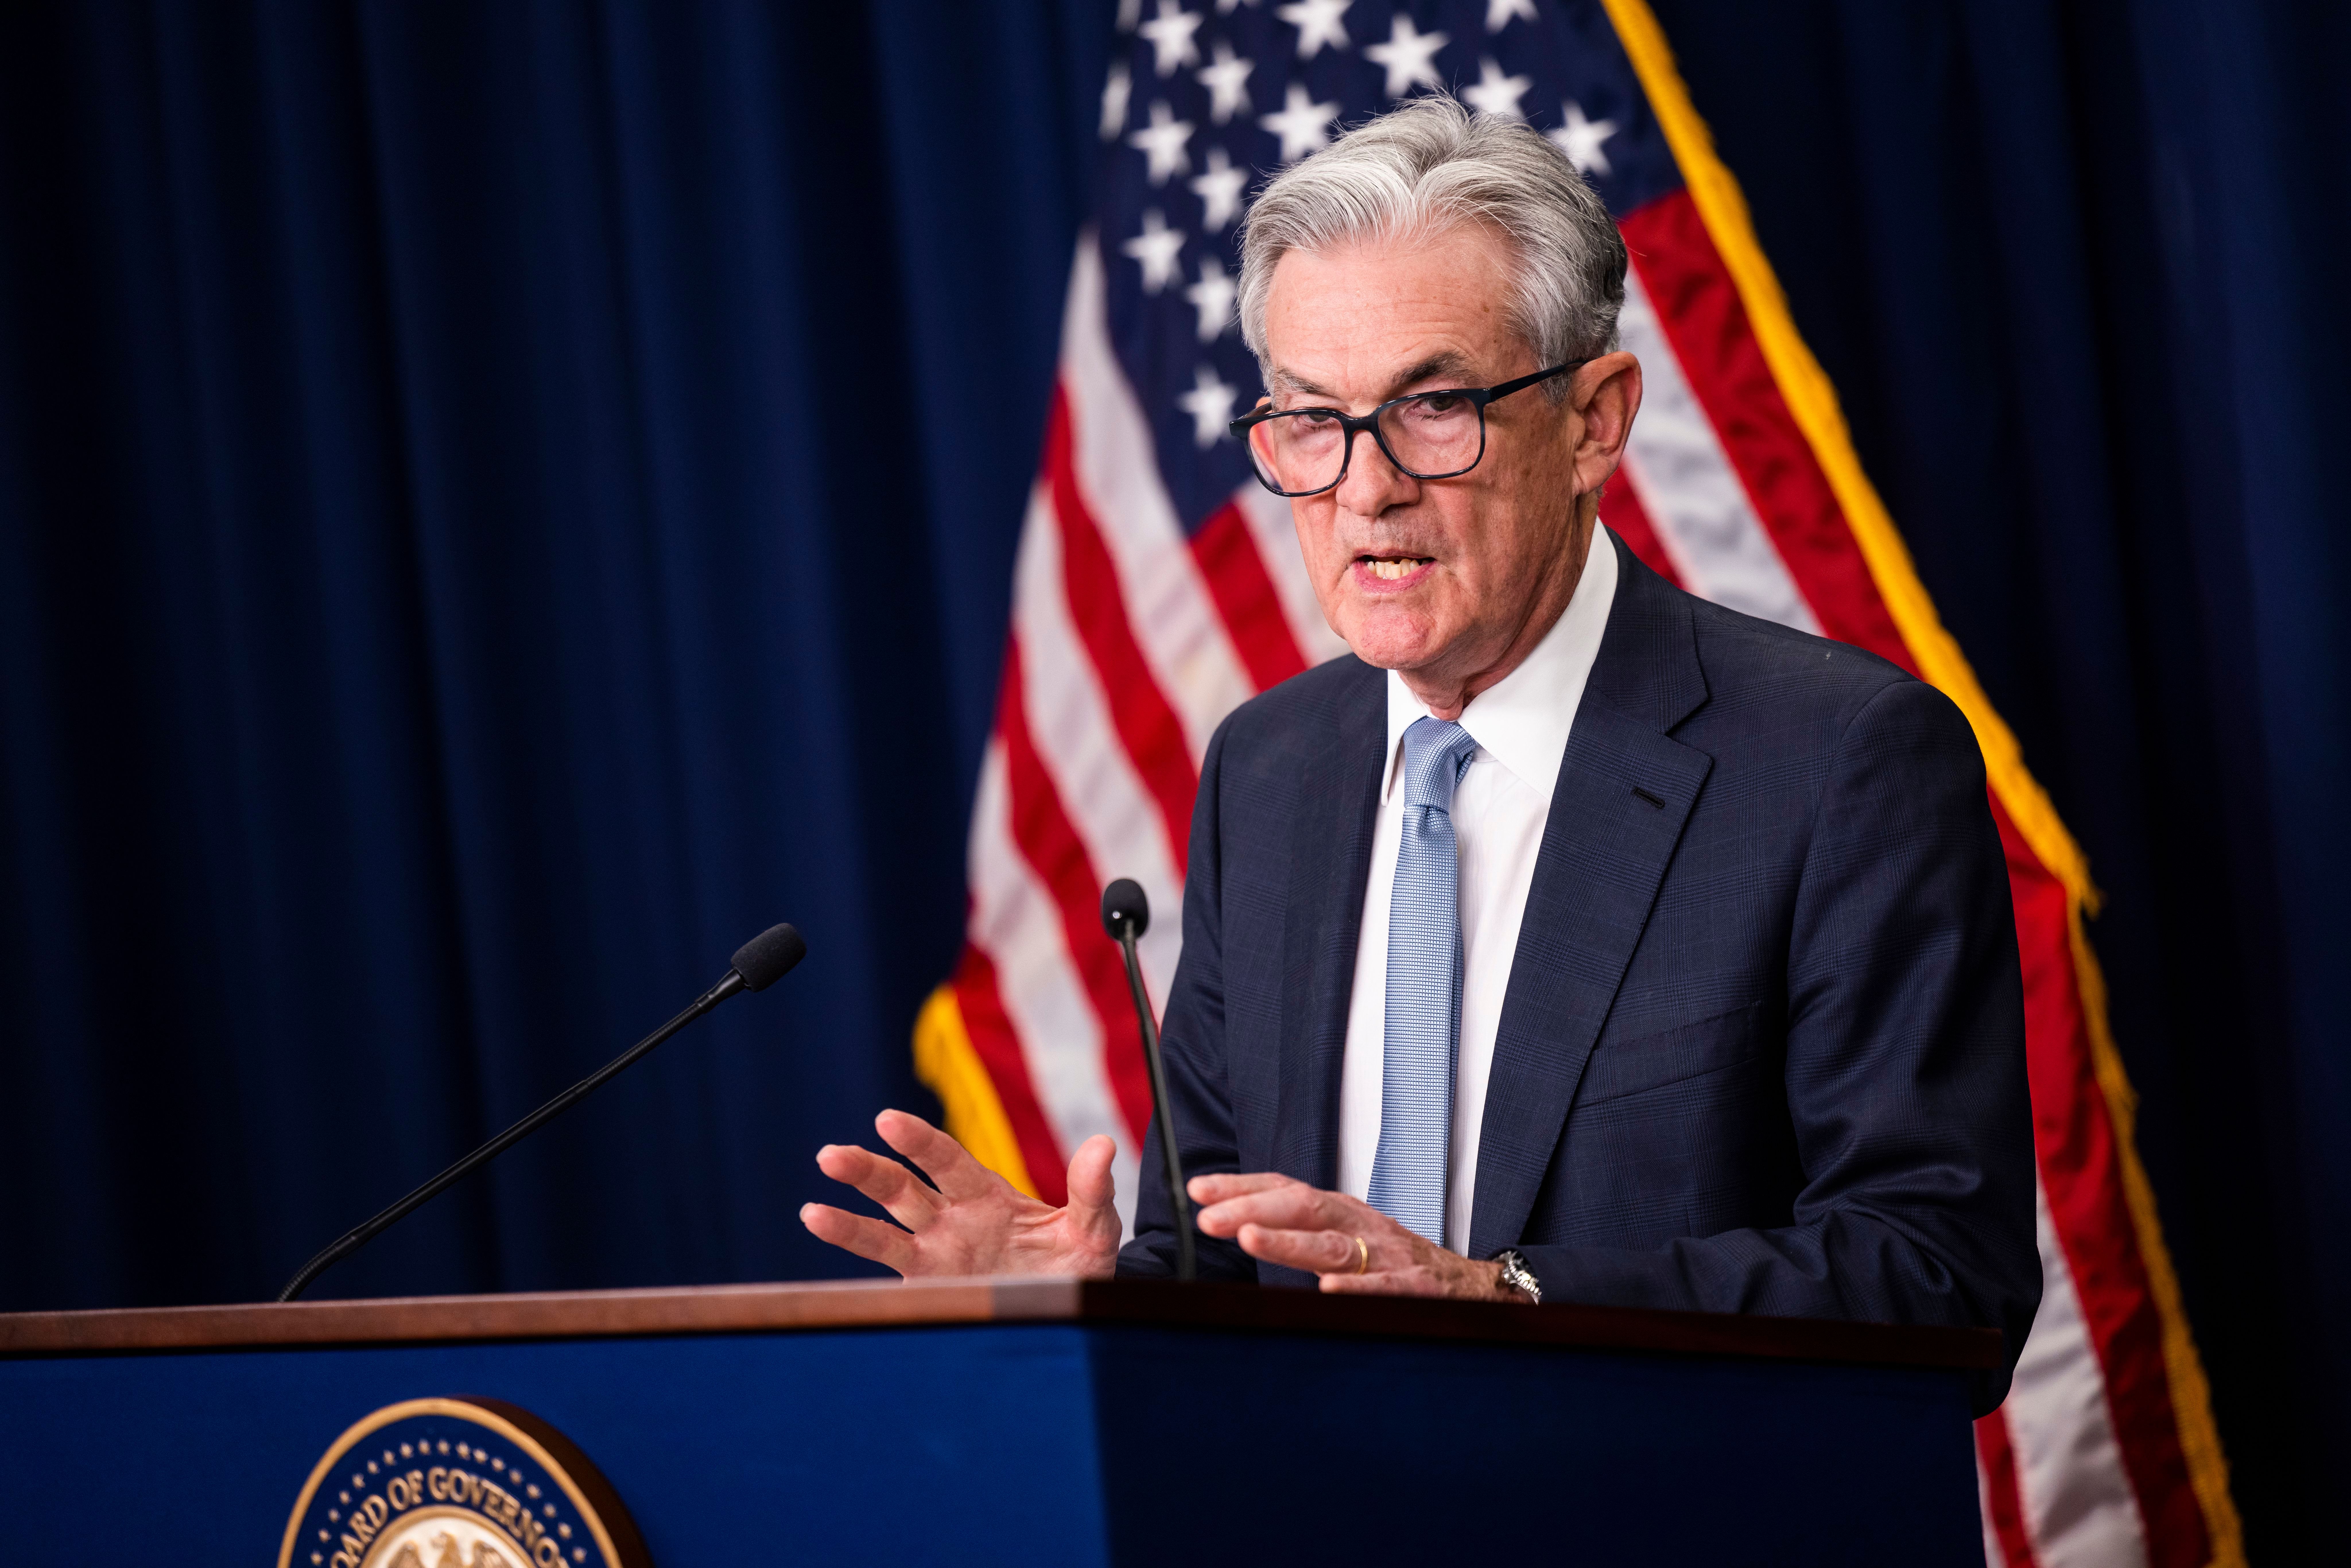 Federal Reserve Board Chairman Jerome Powell at a news conference in June 2022